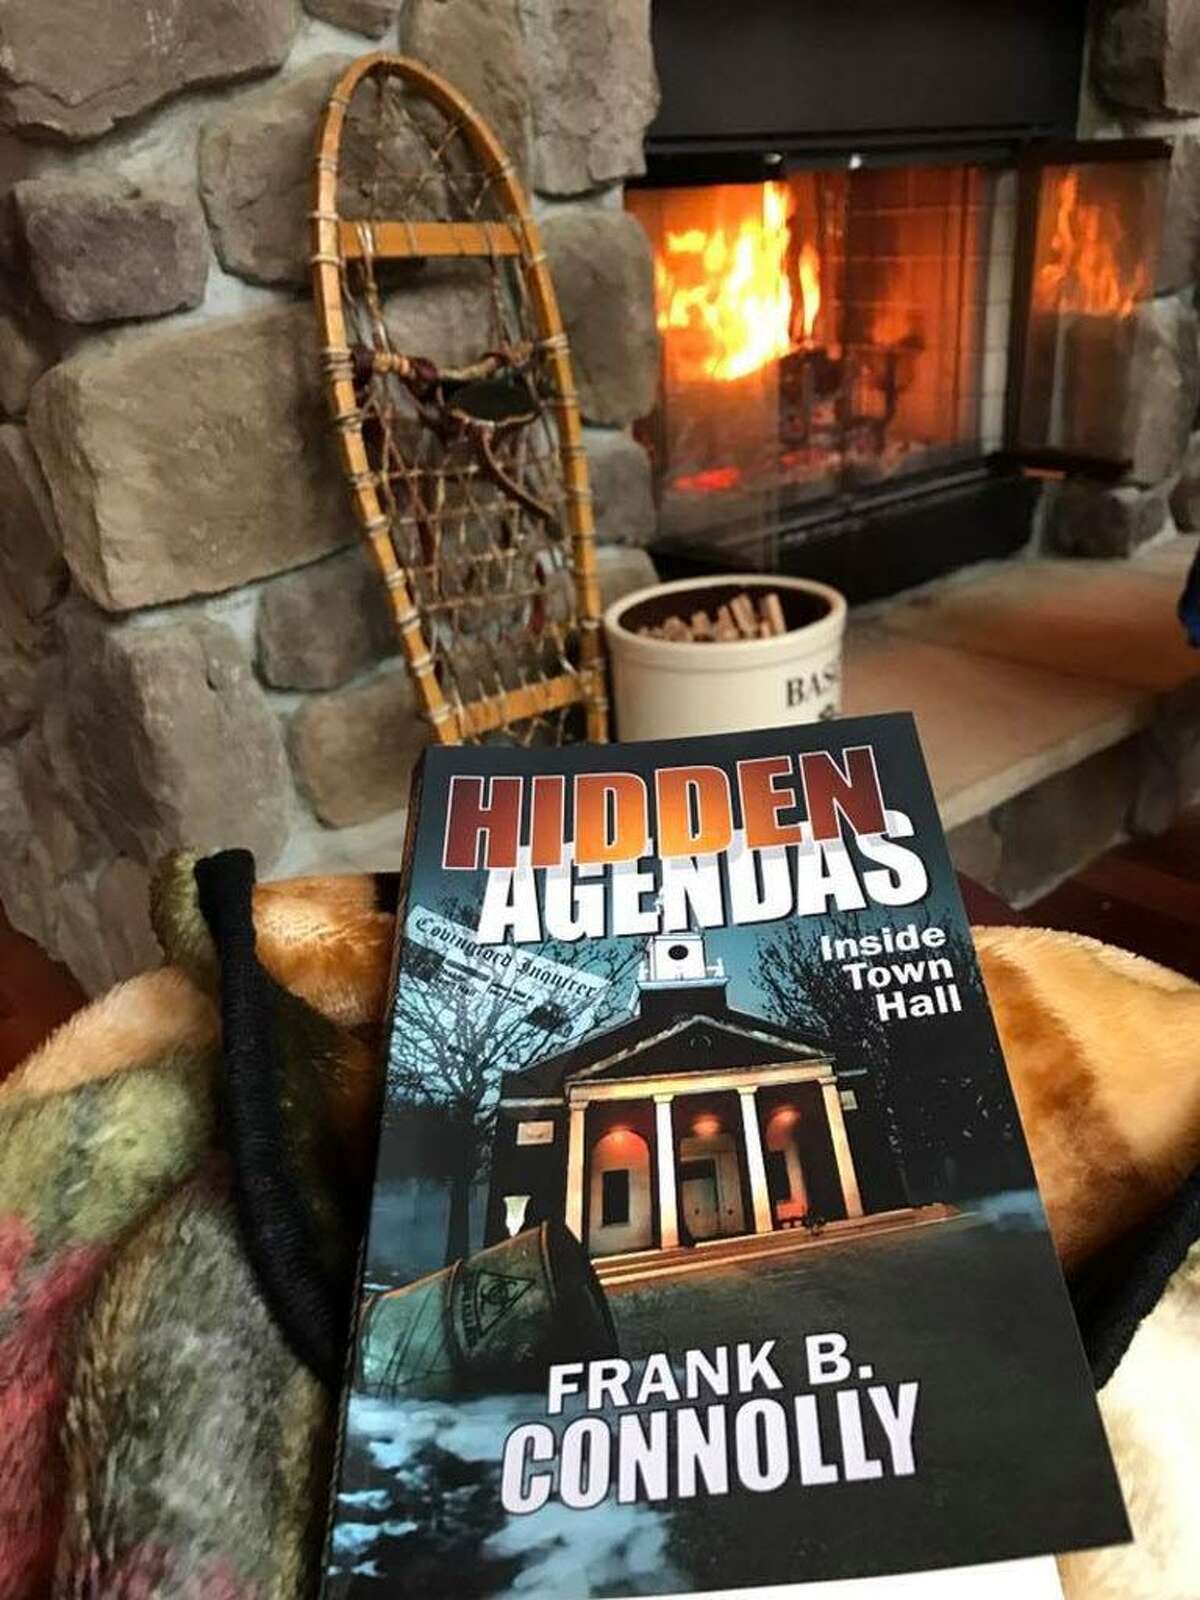 Author Frank Connolly of Portland is the former town manager of North Branford, Newington and Coventry. His novel, “Hidden Agenda: Inside Town Hall,” follows the volatile trail of a proposed land-use development in the fictional town of Covingford, Connecticut.